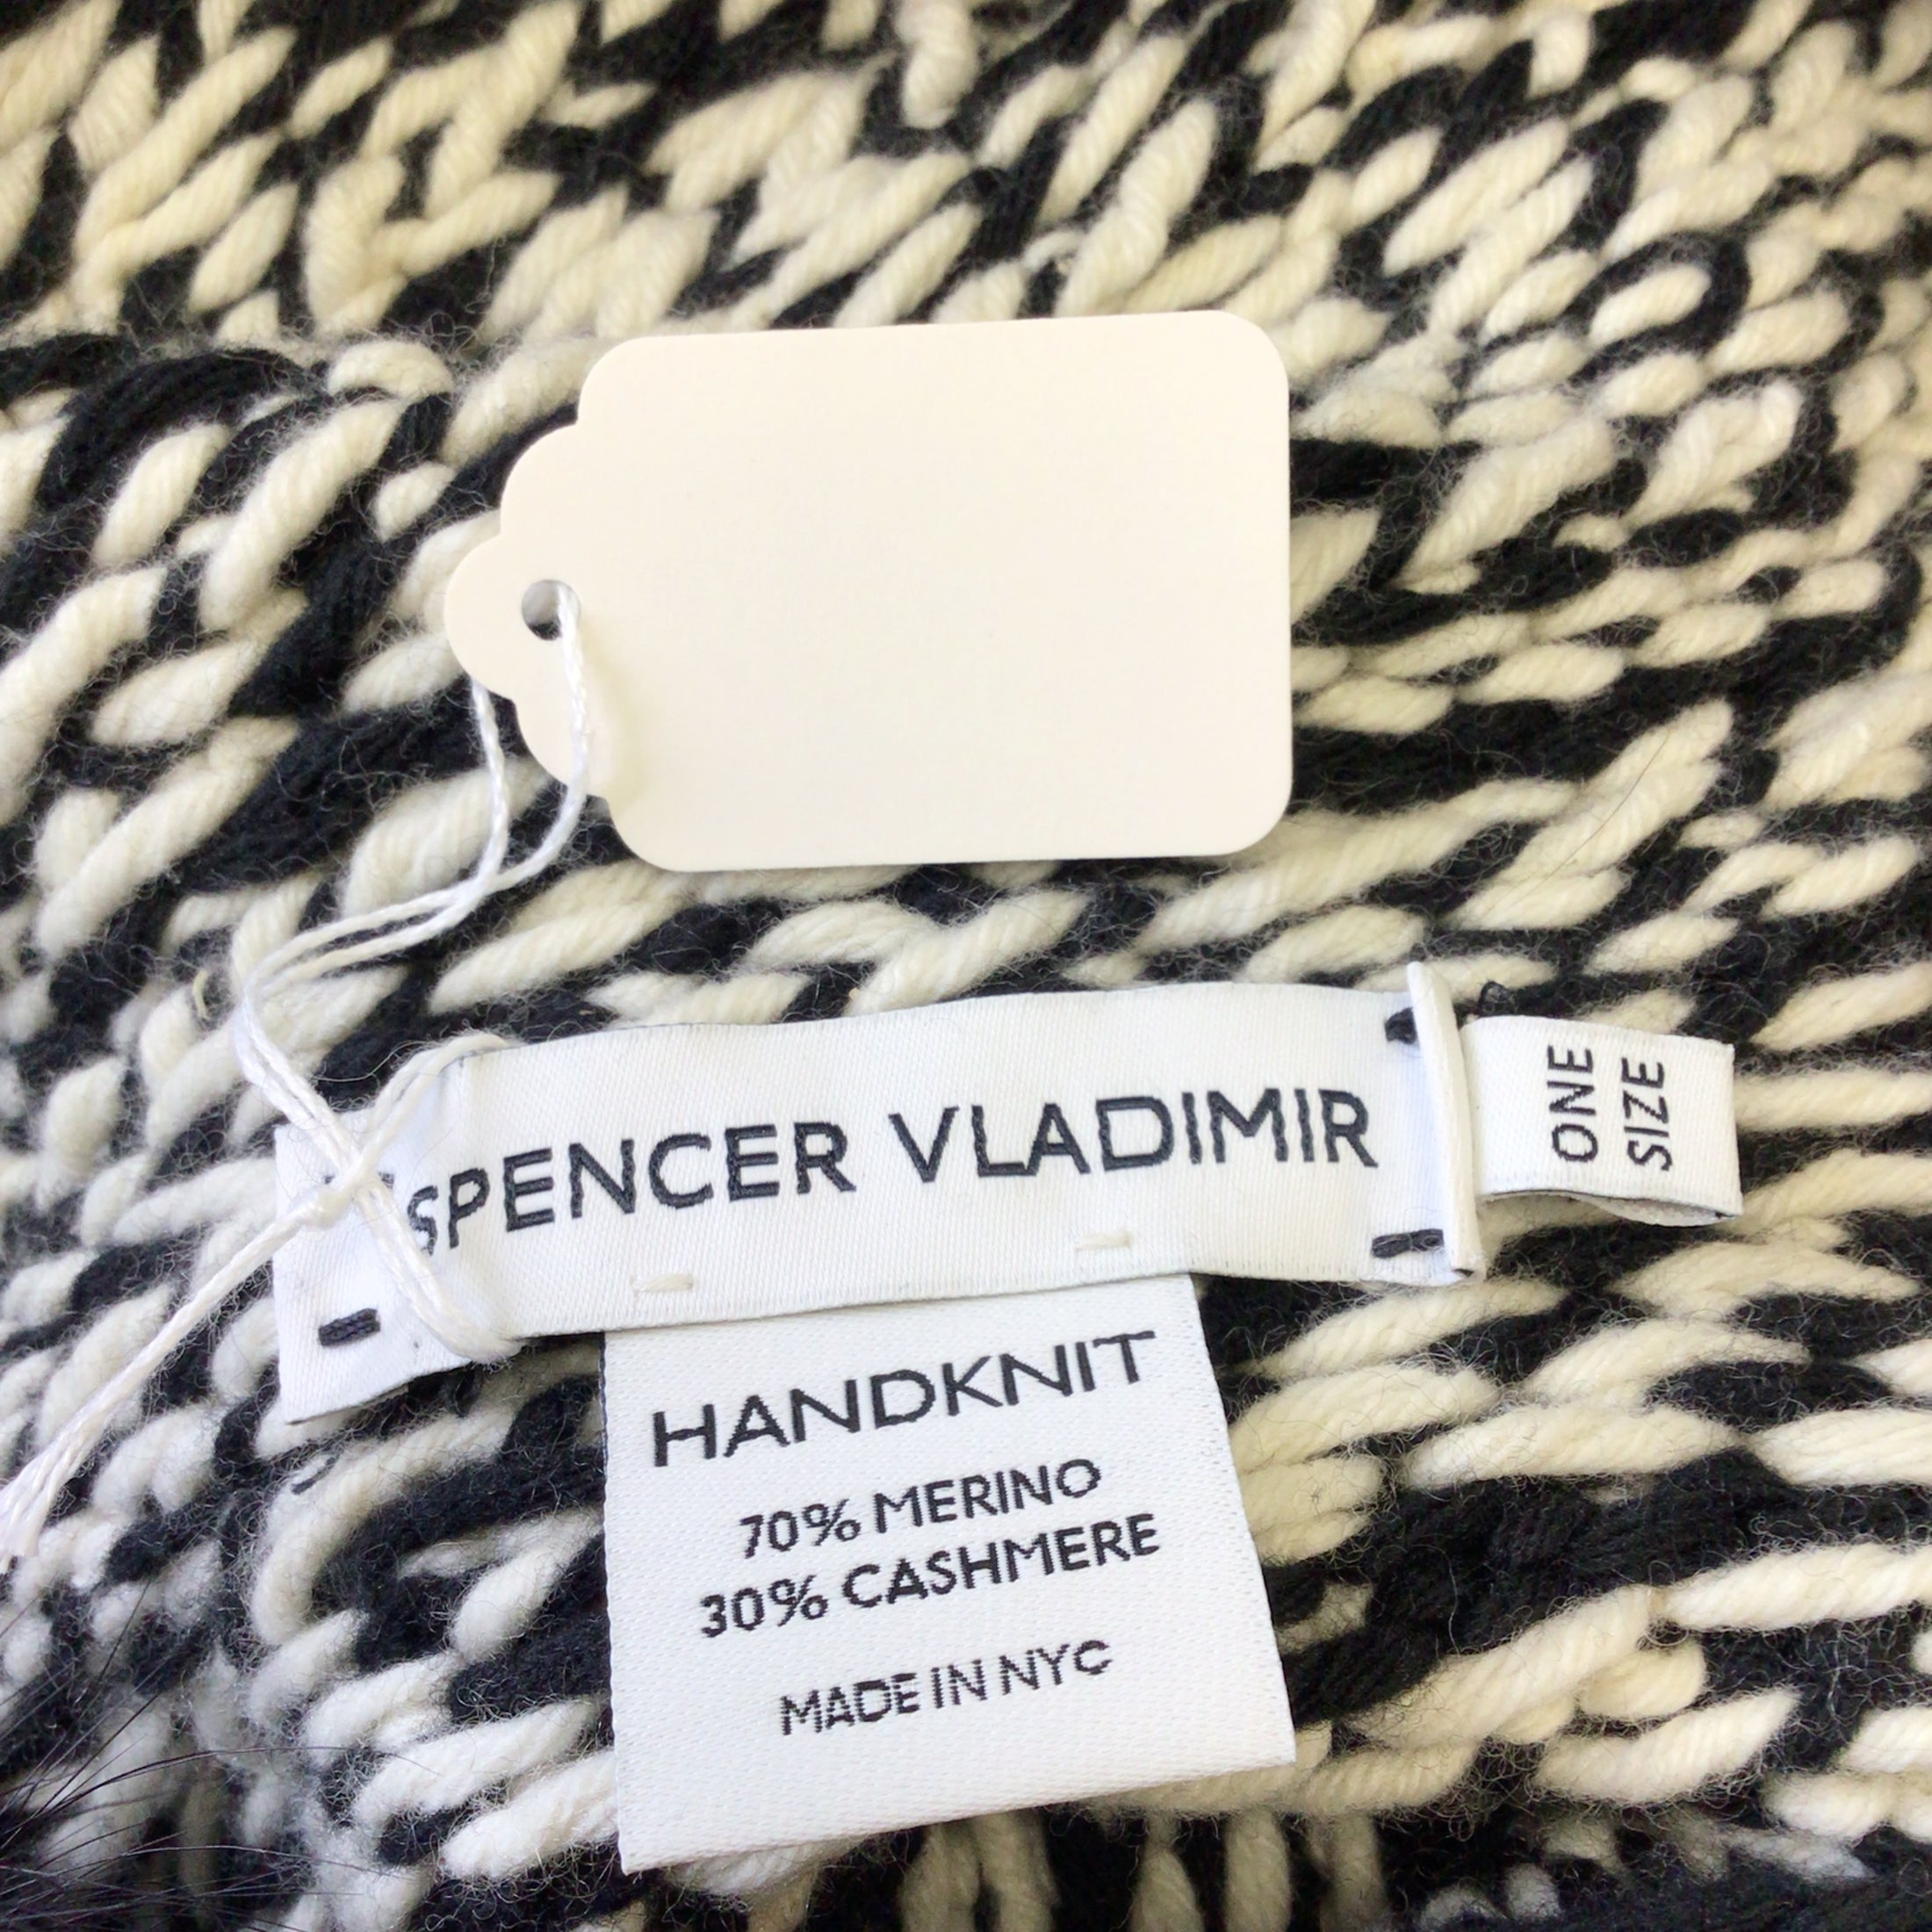 Spencer Vladimir Black / Ivory Fur Trimmed Hooded Merino Wool and Cashmere Hand Knit Sweater